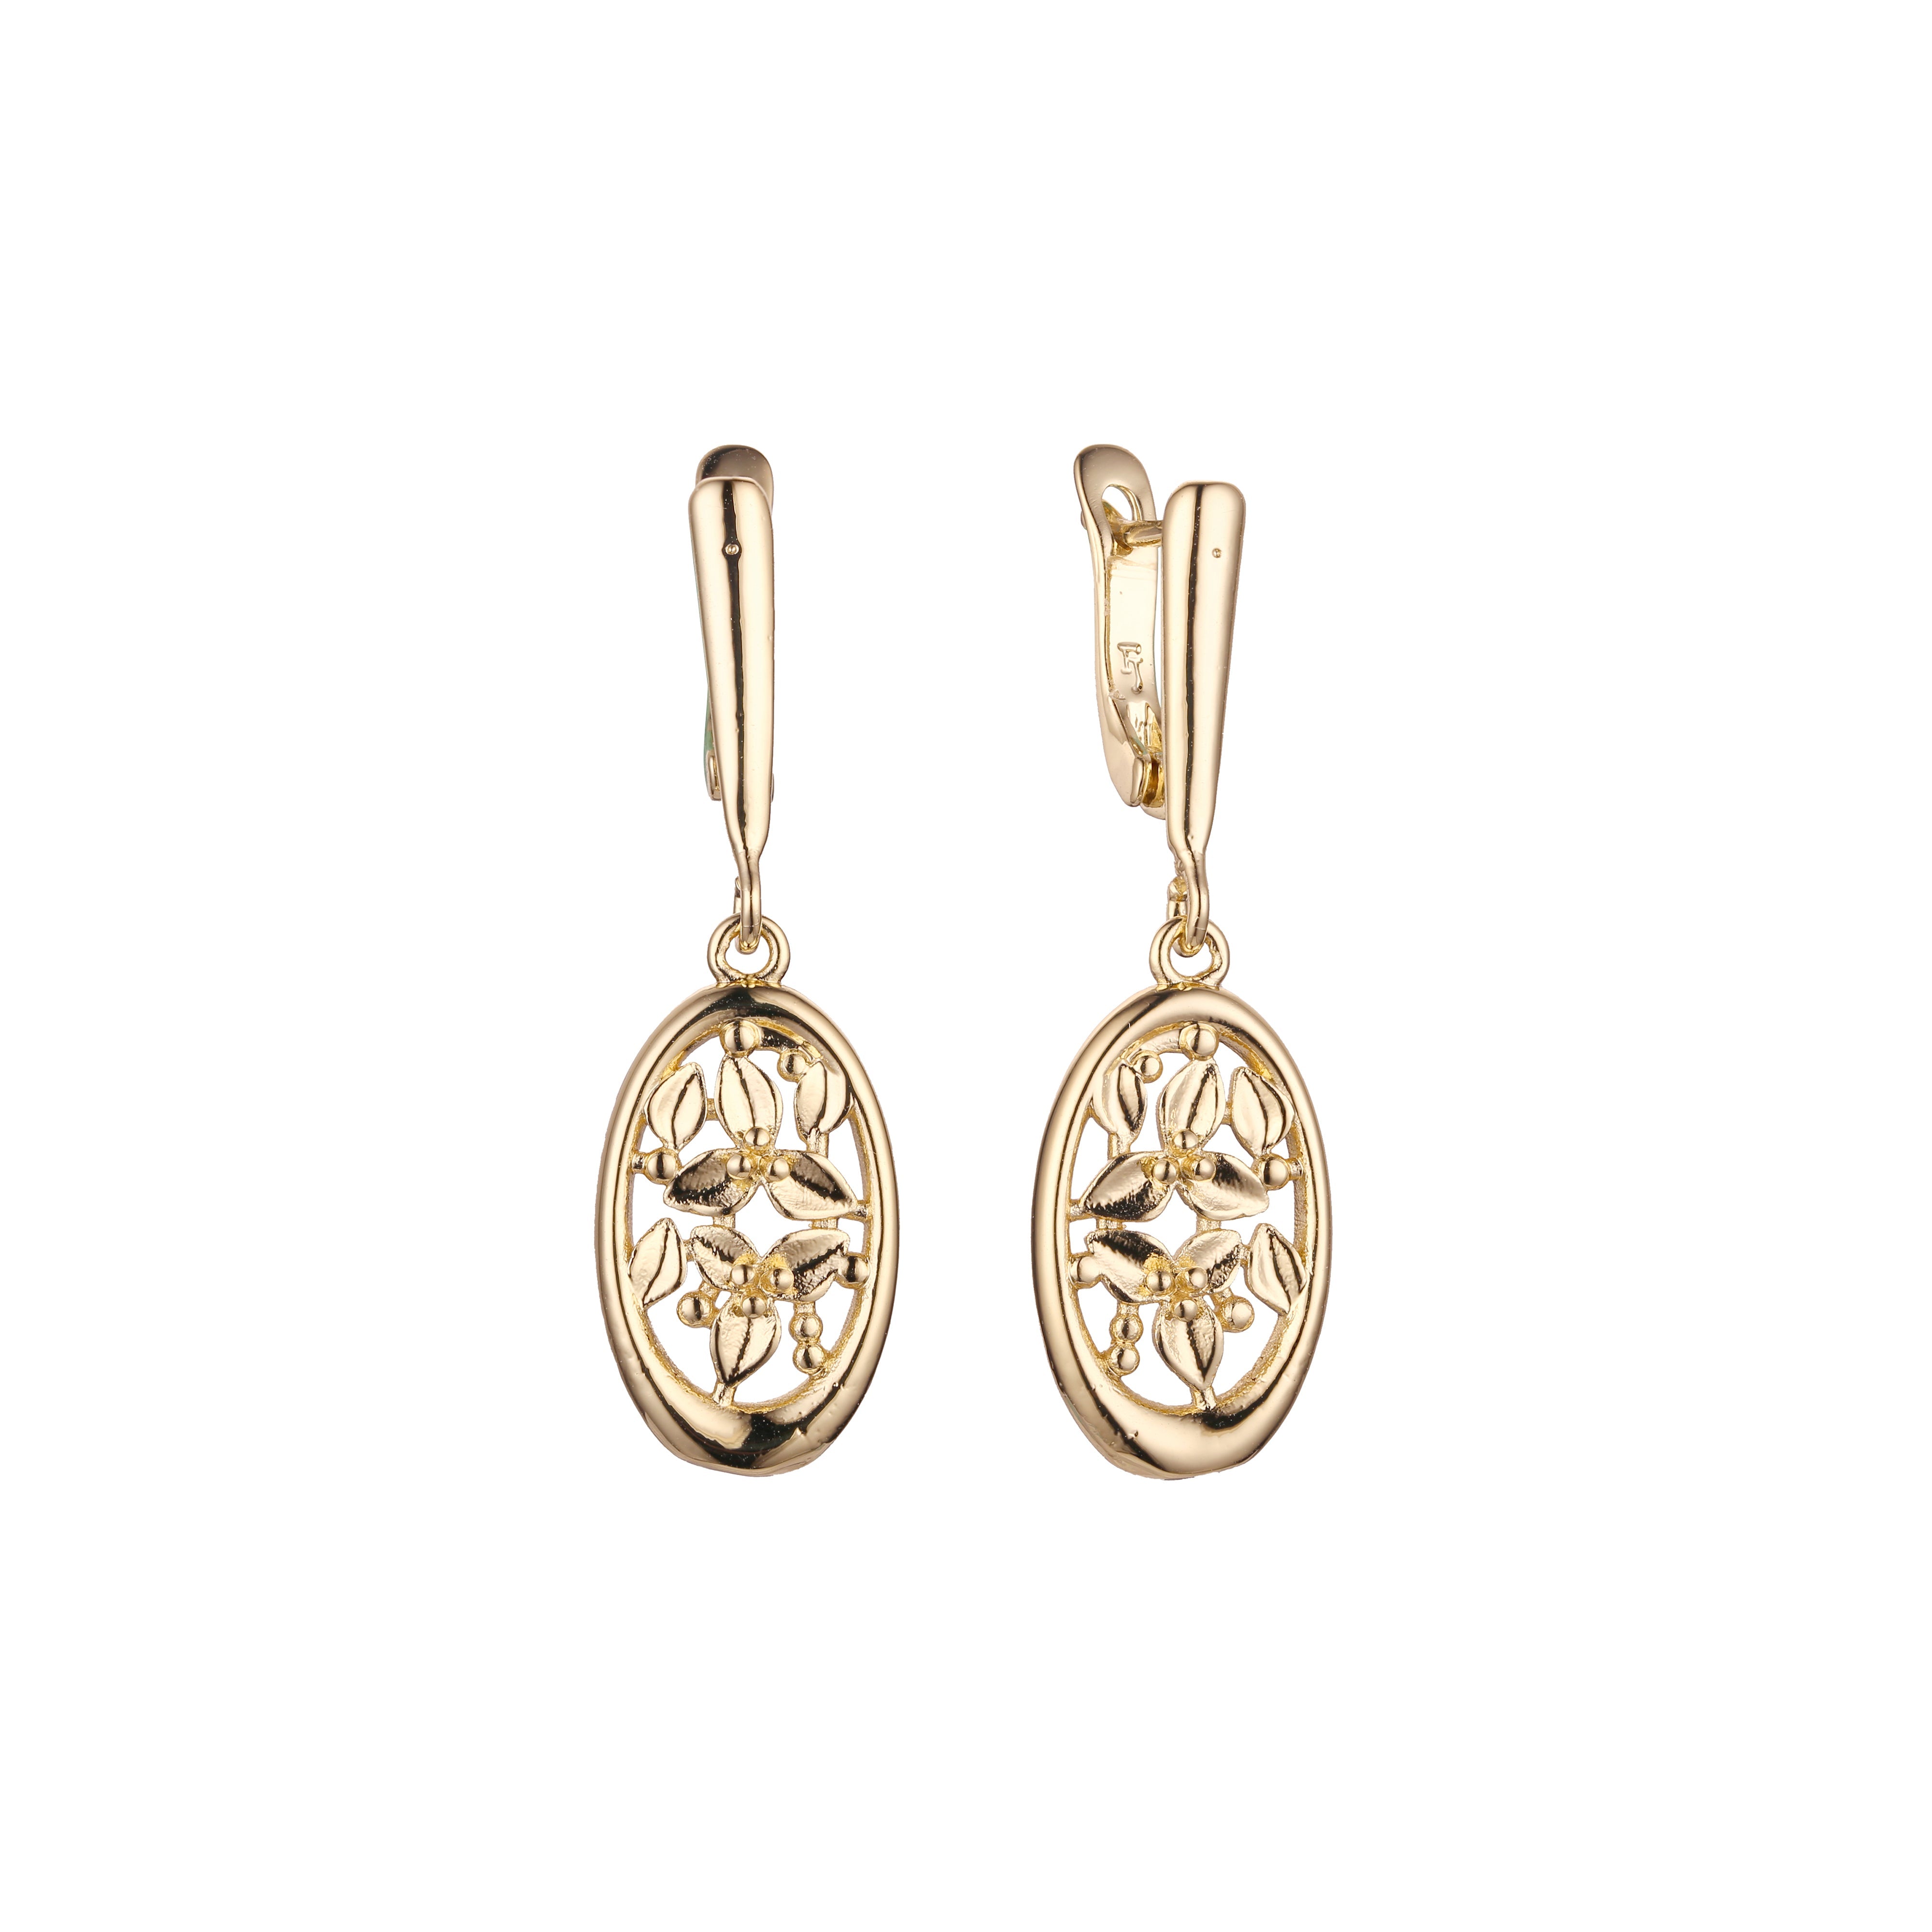 Leaves earrings in 14K Gold, Rose Gold, two tone plating colors